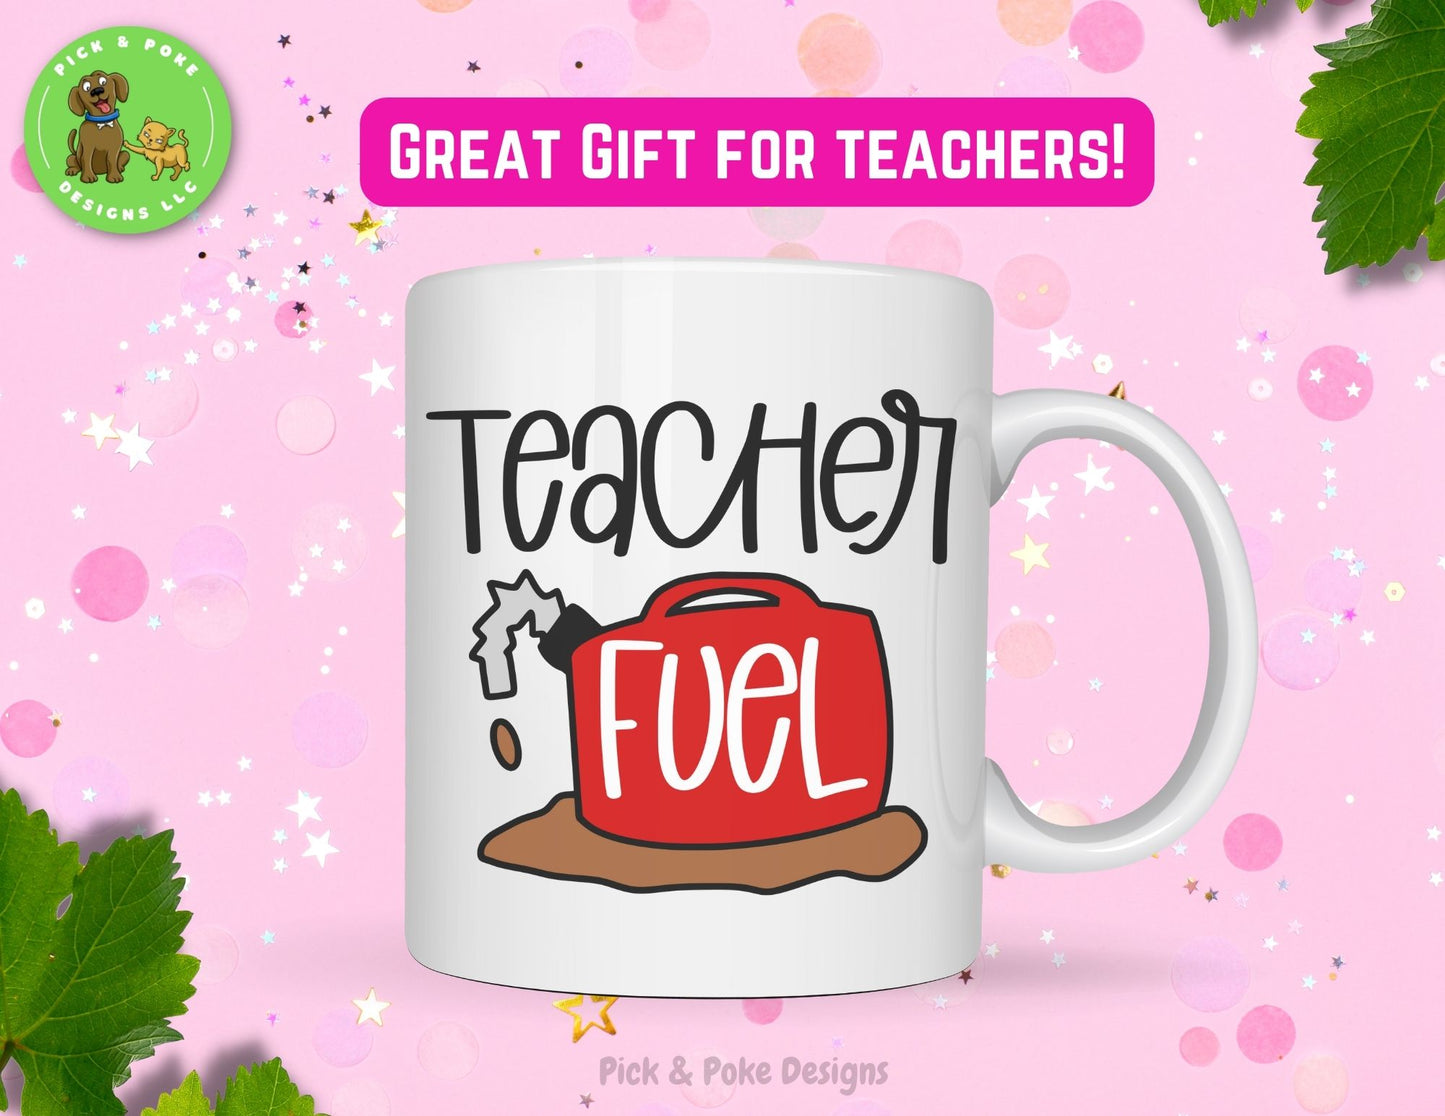 11oz Teacher Fuel mug is designed to be a great gift for teachers and educators. 